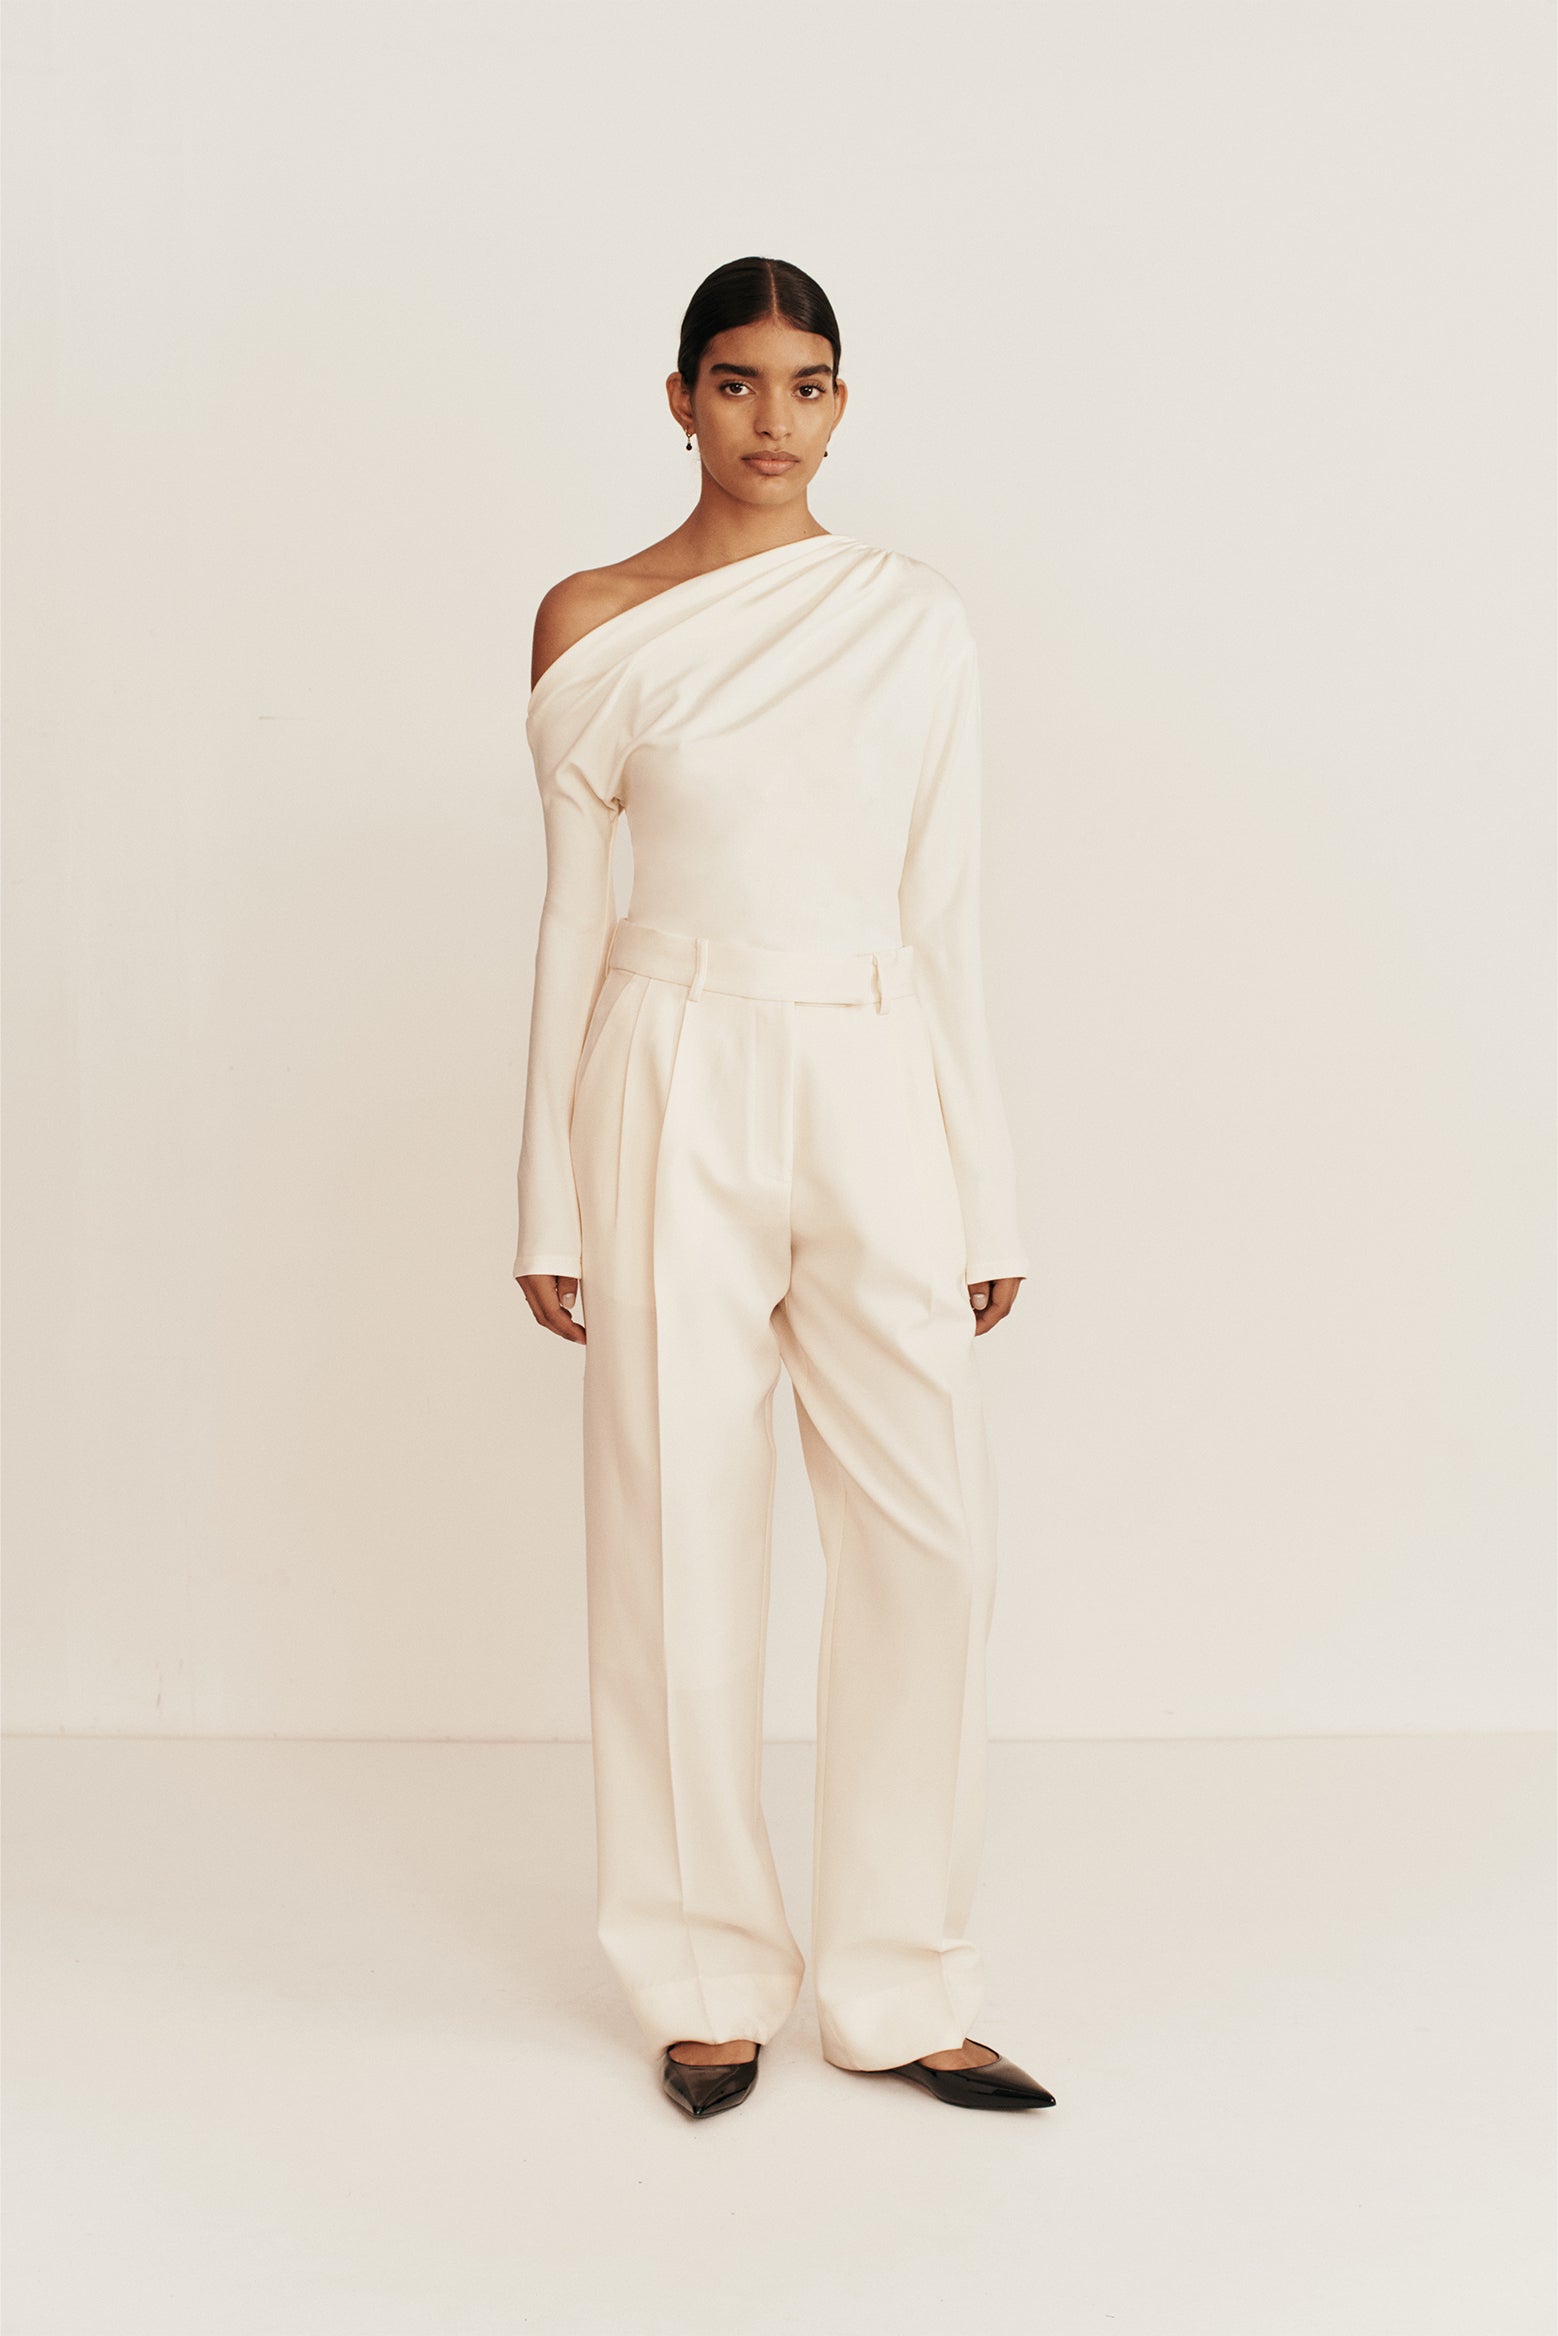 Esse Portia Tailored Trouser in Crema available at The New Trend Australia. 